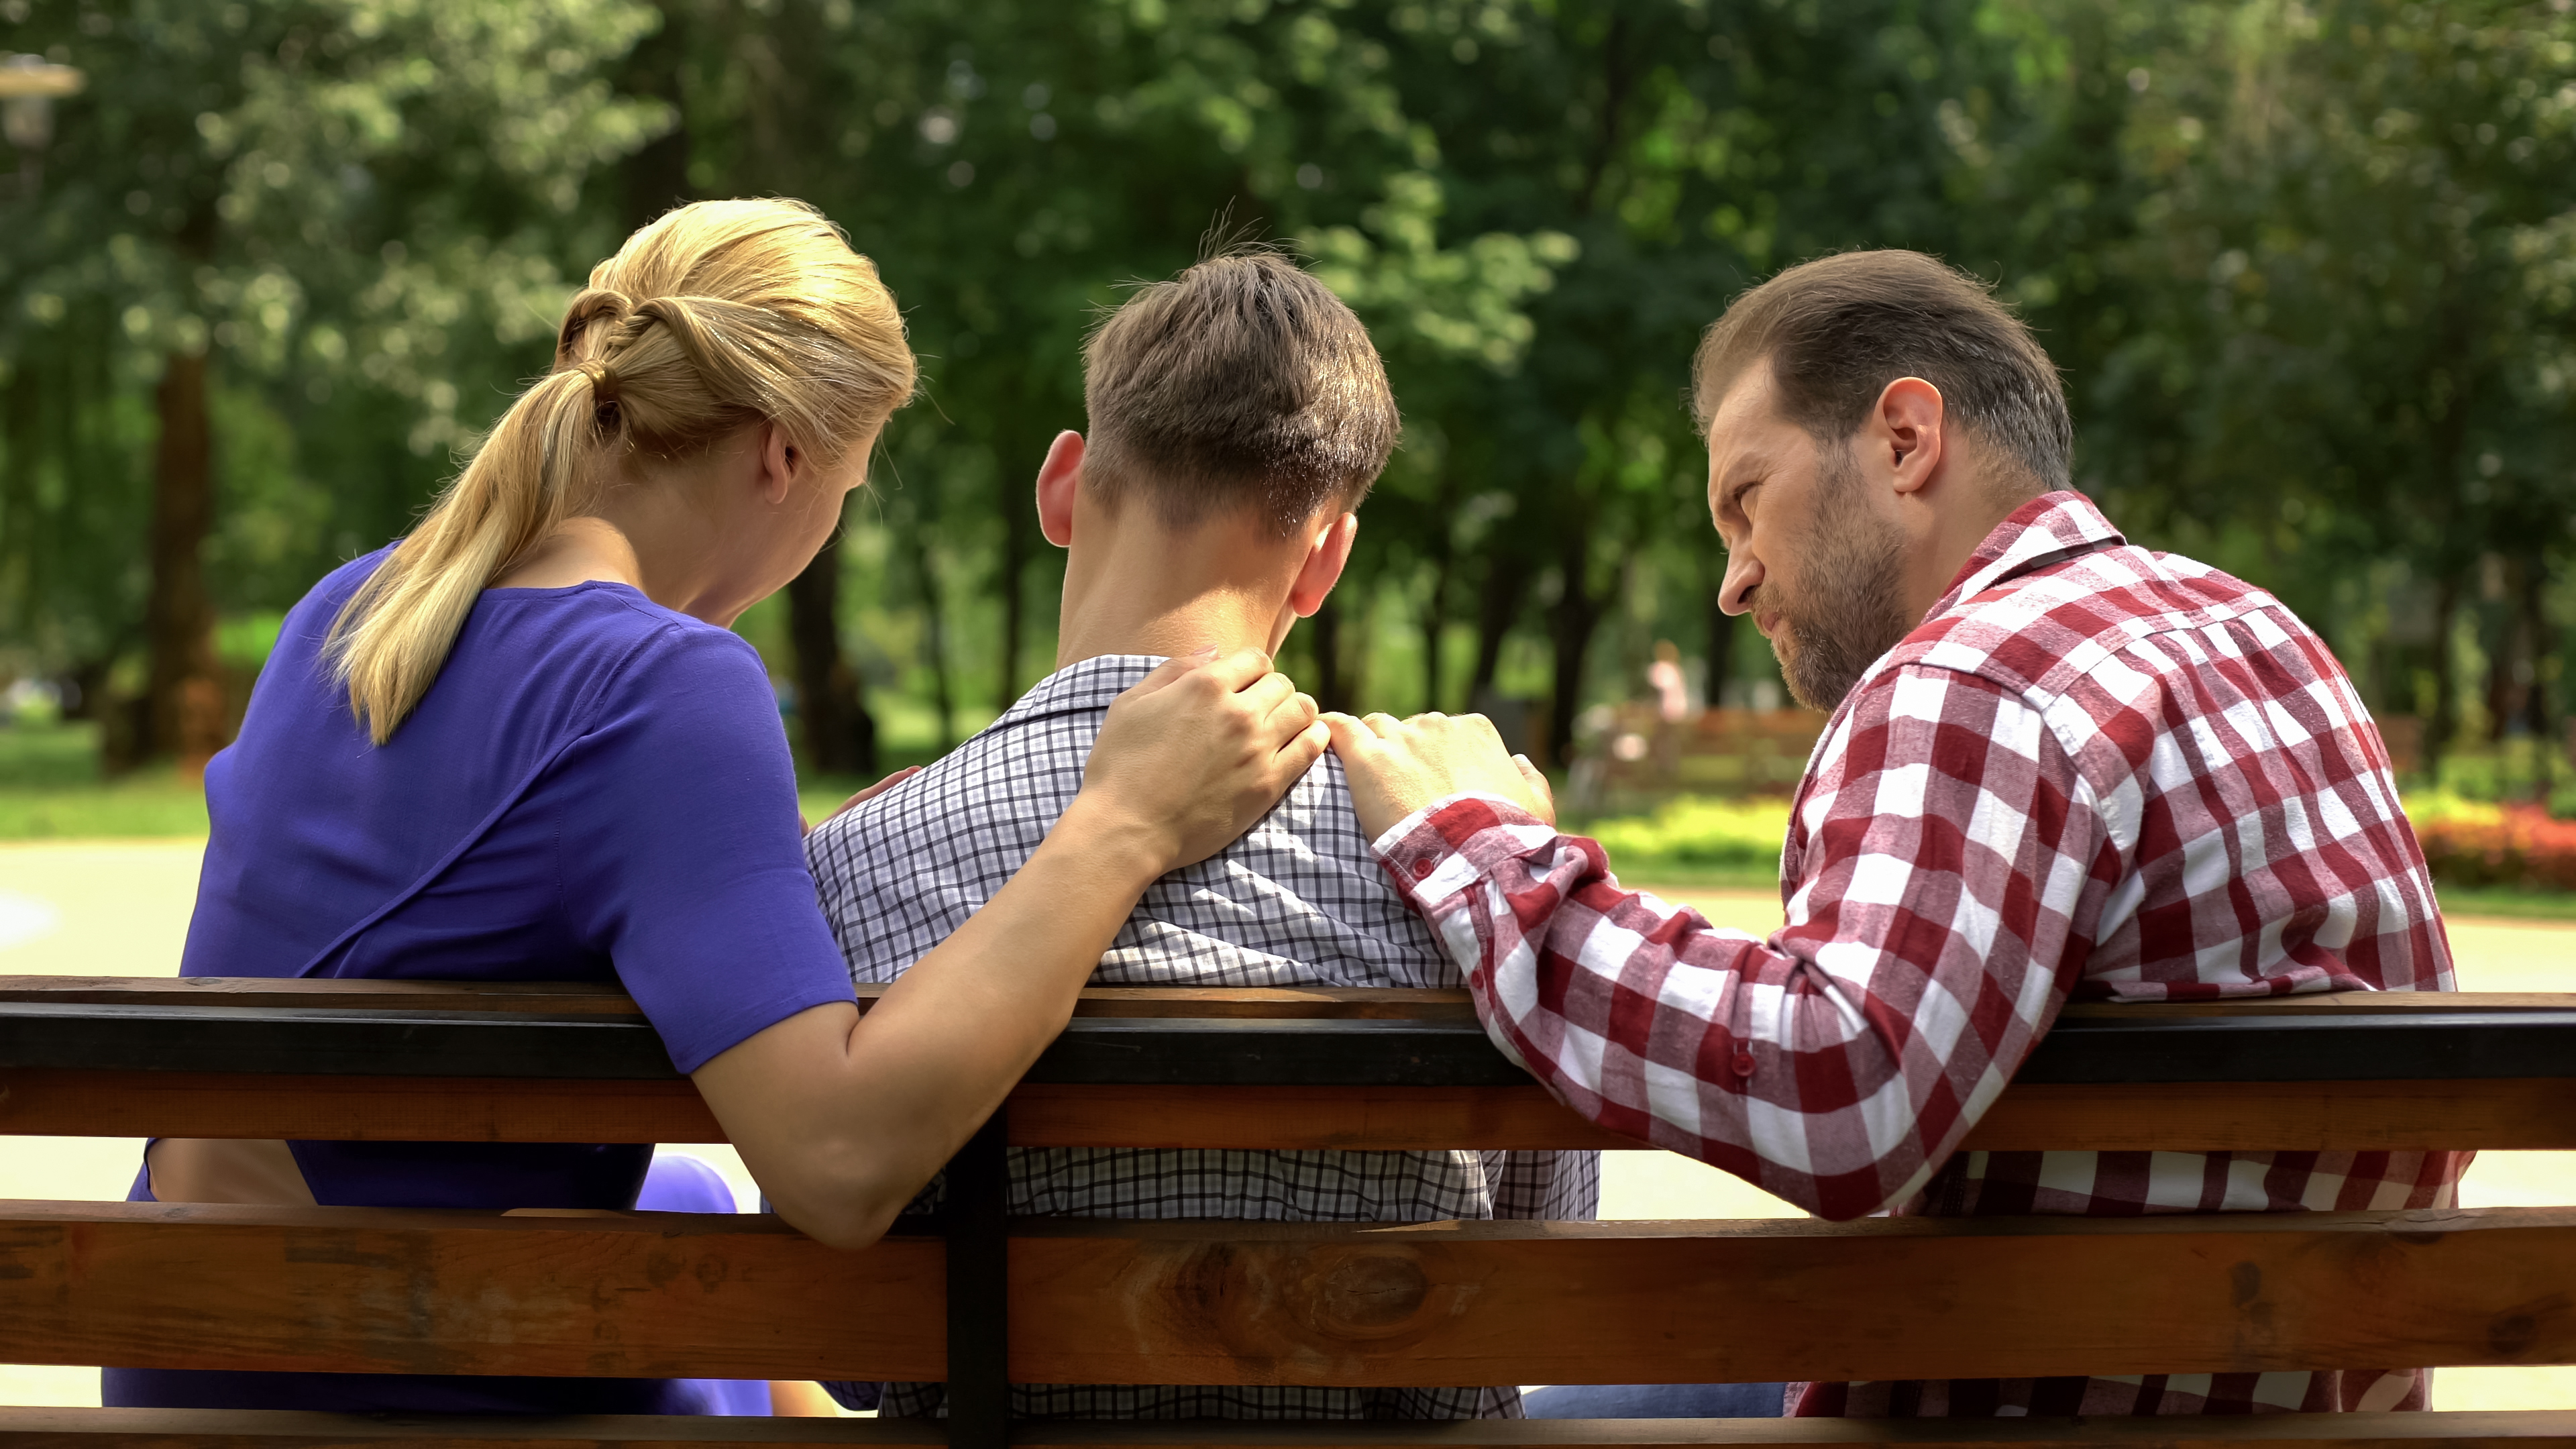 A couple is pictured talking to their teenage son in the park | Source: Shutterstock